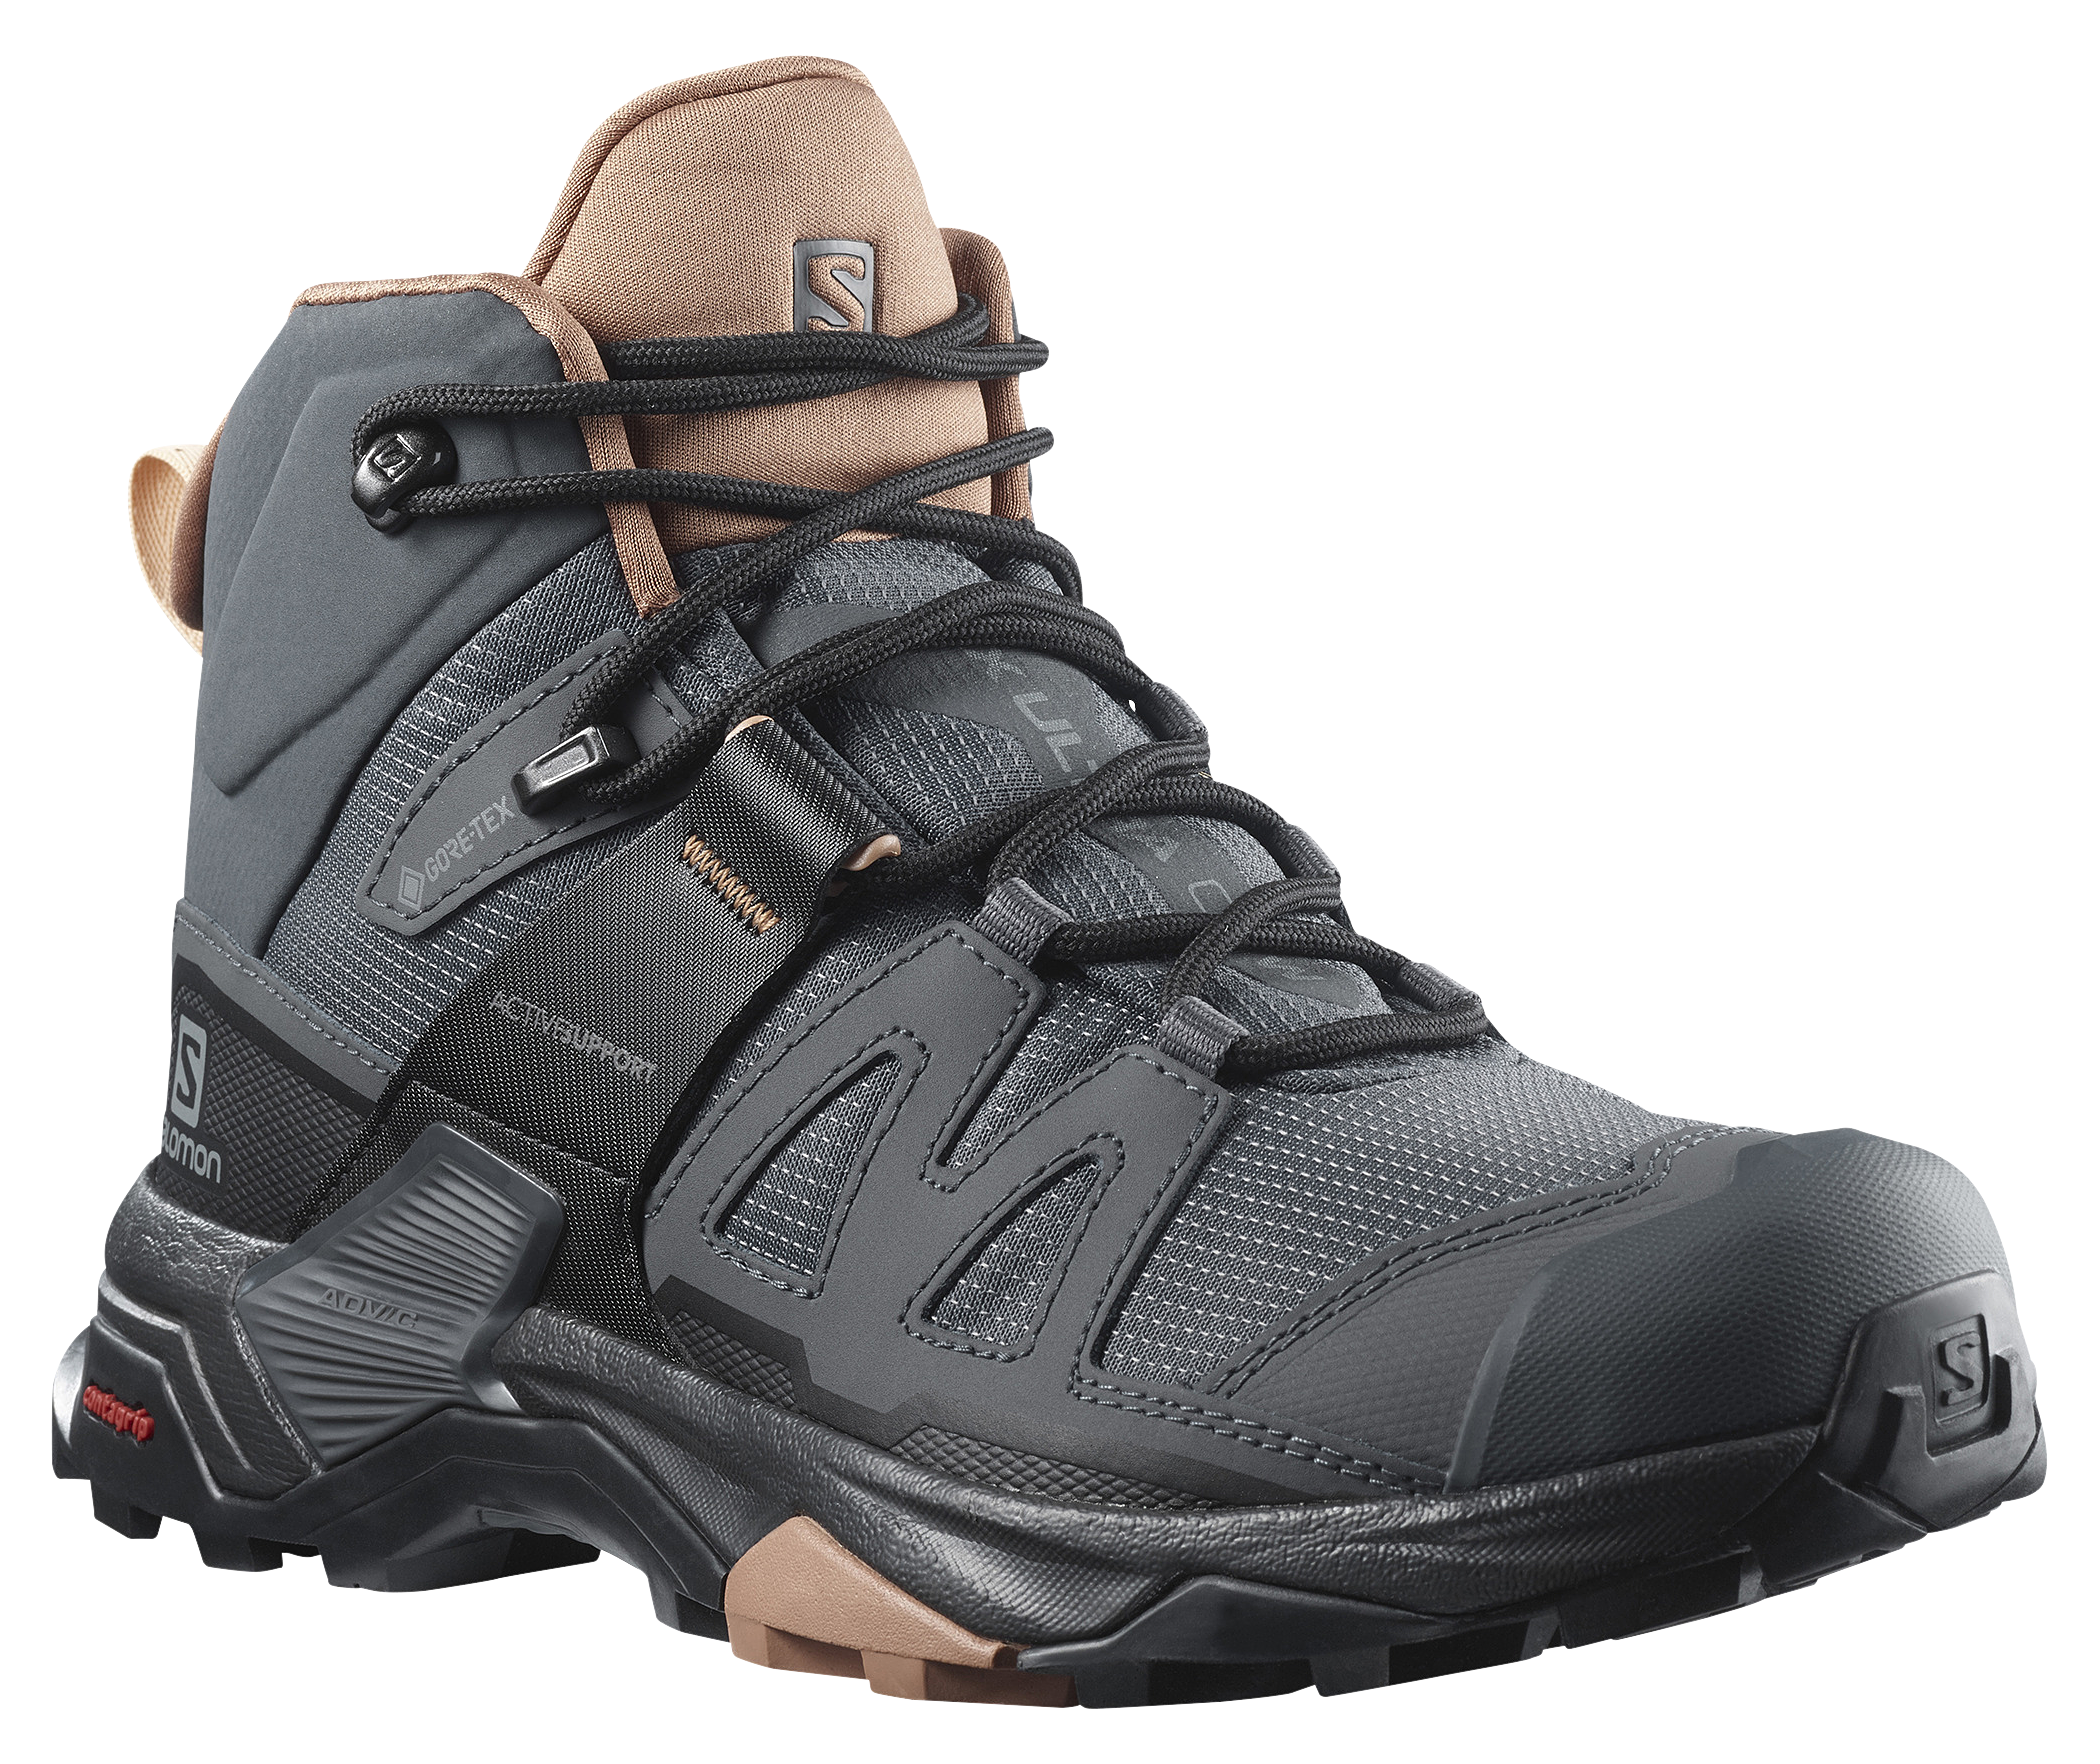 Salomon X Ultra 4 Mid GORE-TEX Hiking Boots for Ladies